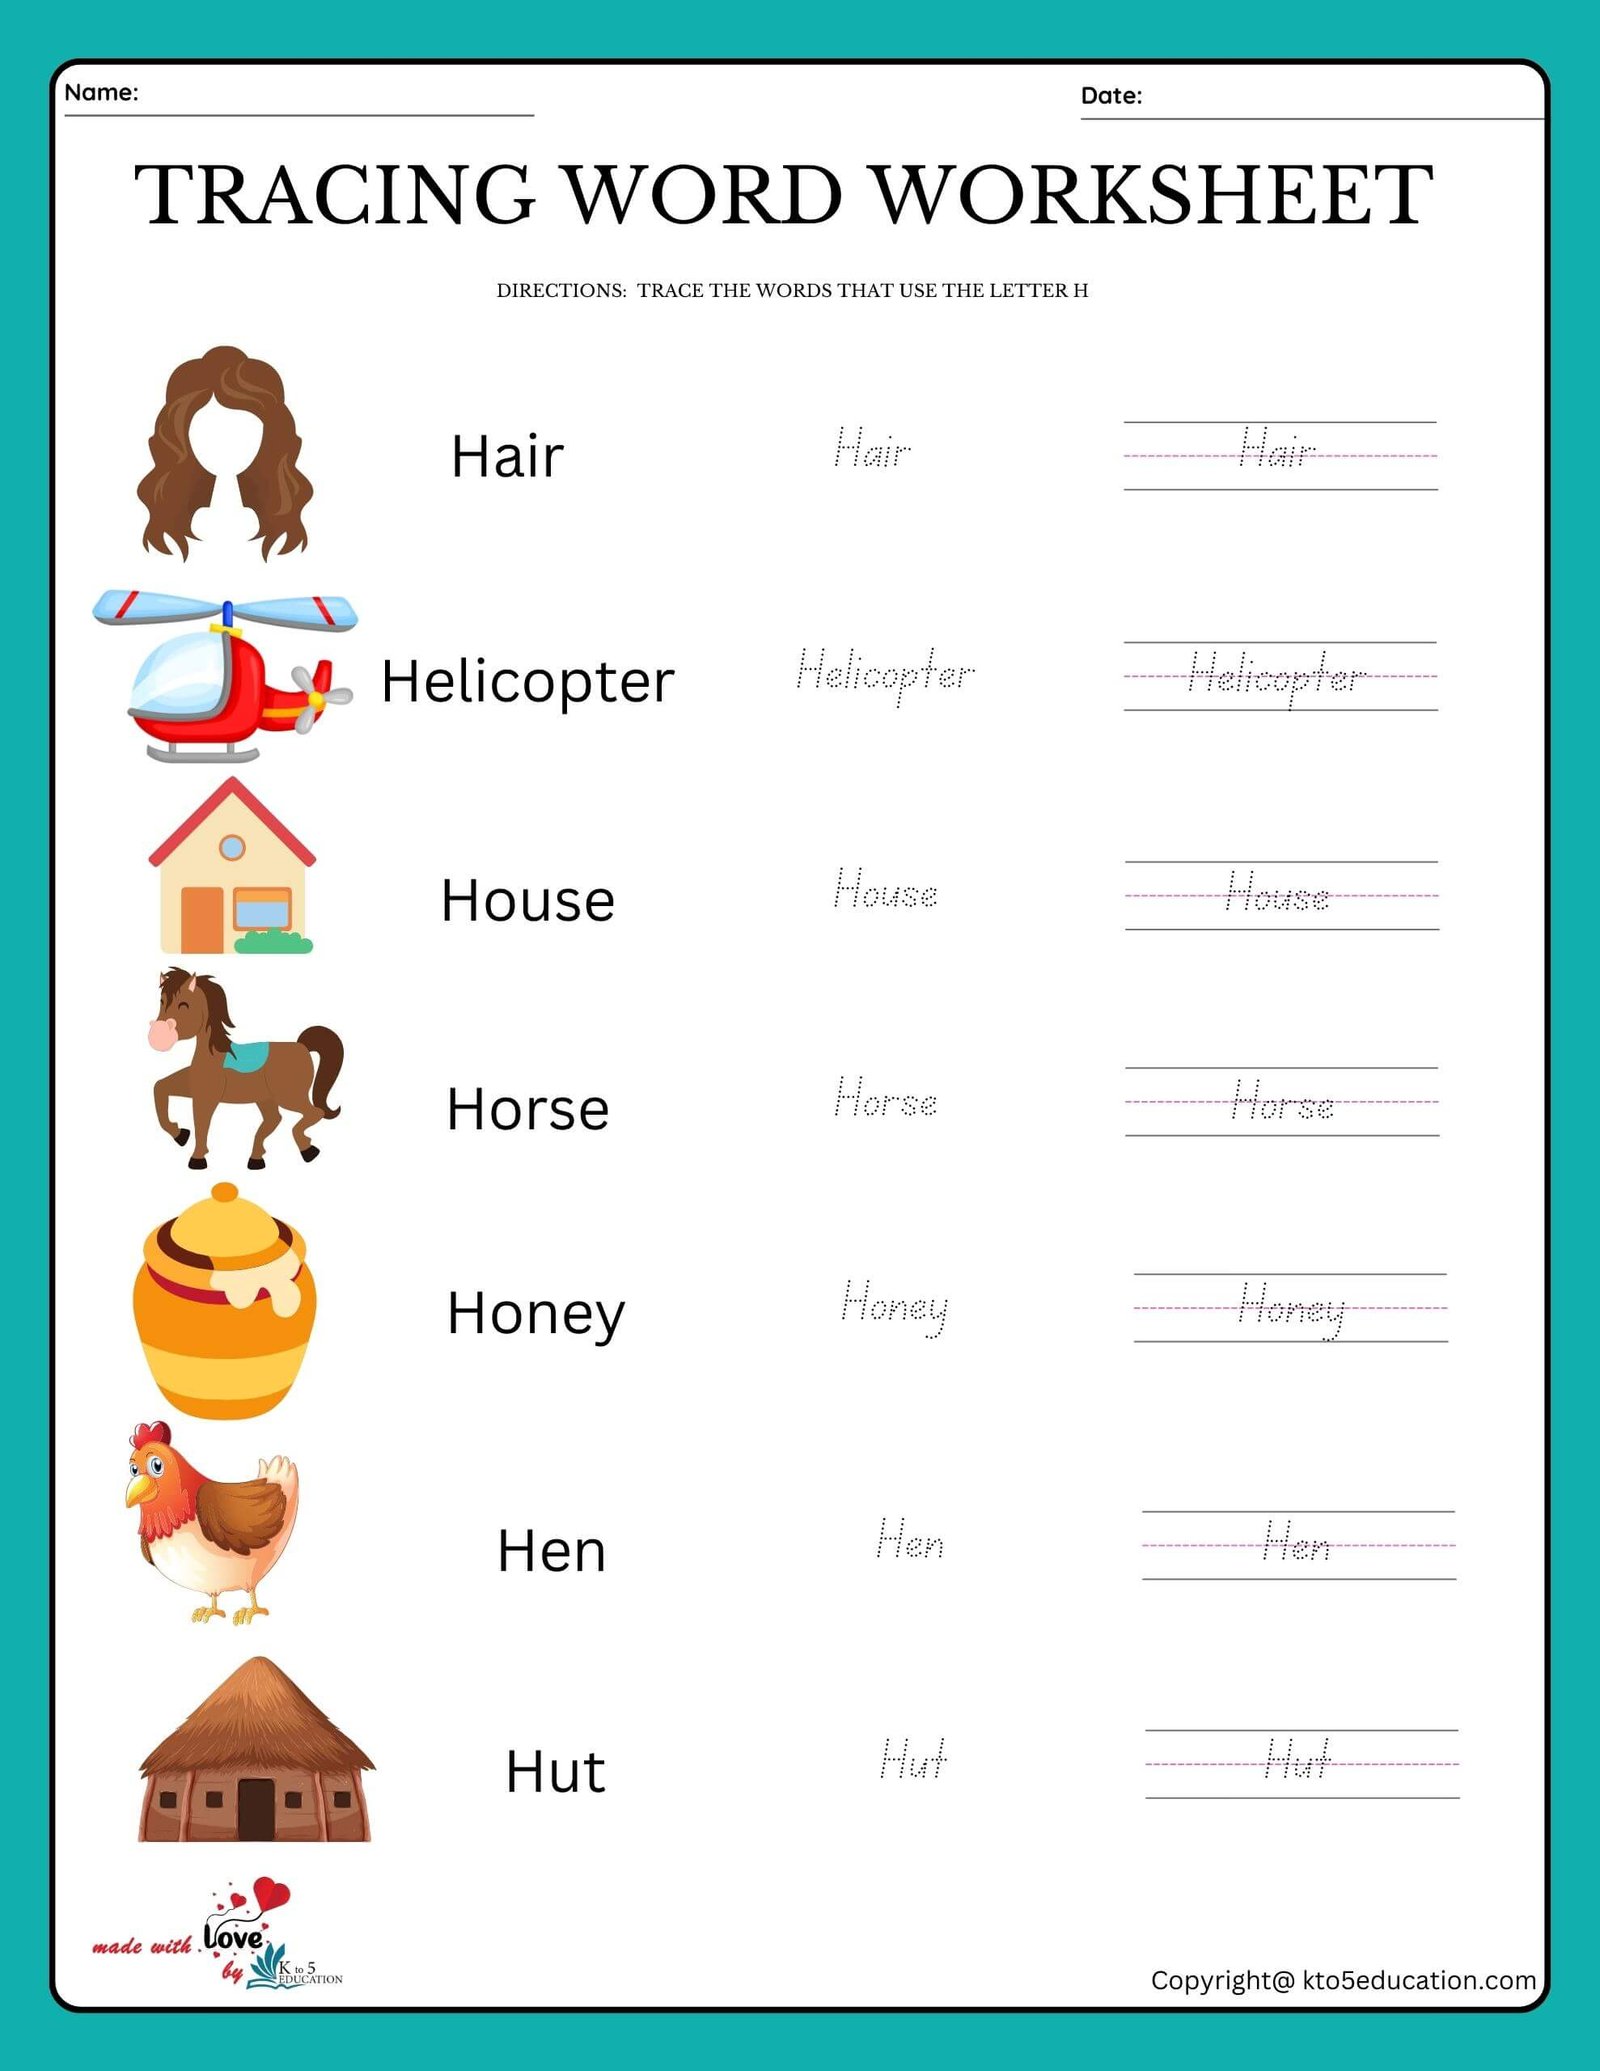 Trace The Words That Use The Letter H Worksheet